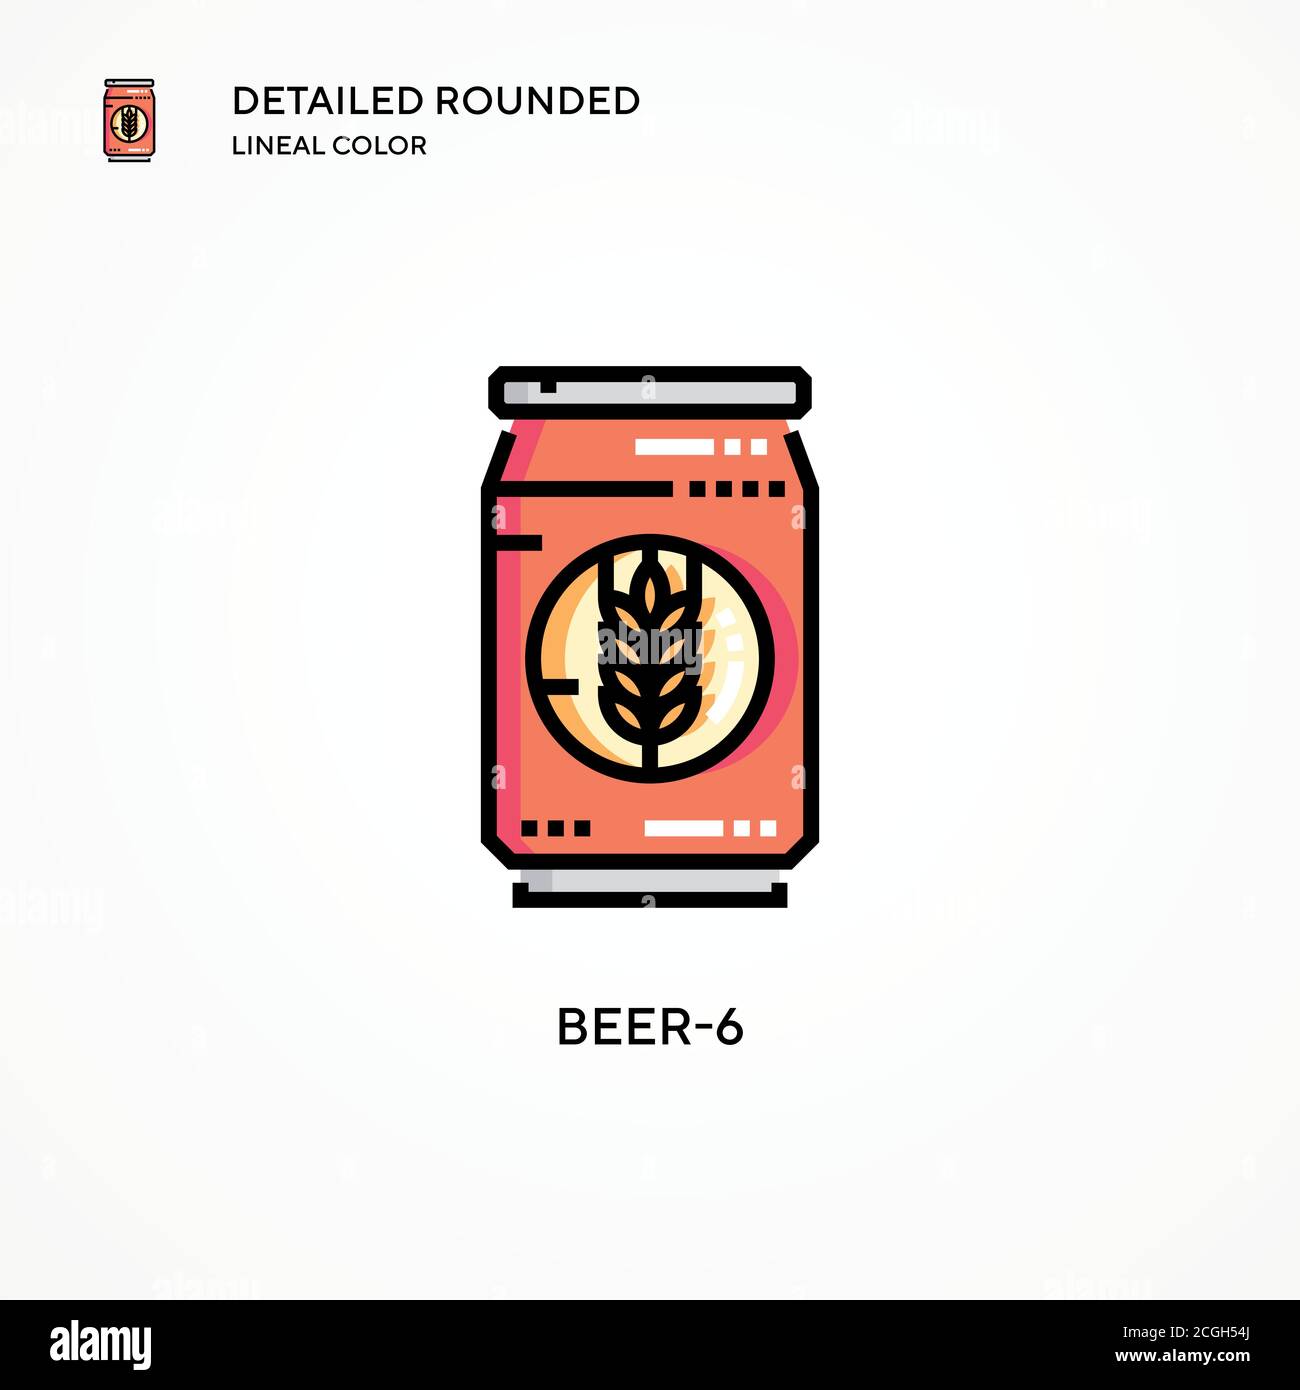 Beer-6 vector icon. Modern vector illustration concepts. Easy to edit and customize. Stock Vector